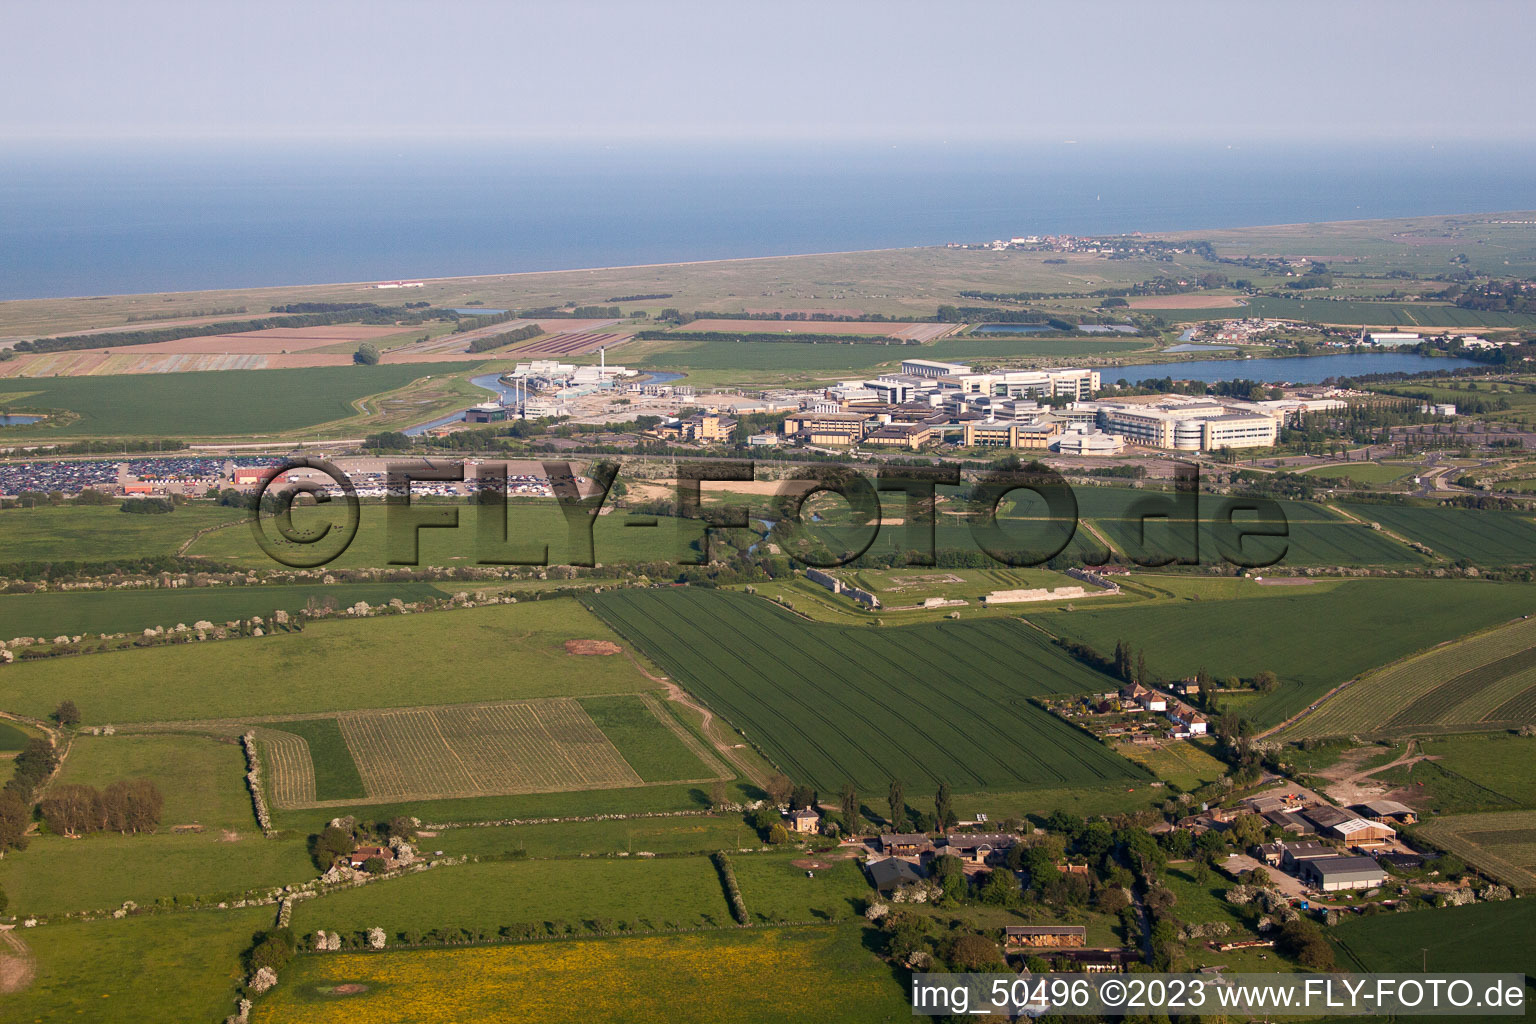 Aerial view of Richborough in the state England, Great Britain